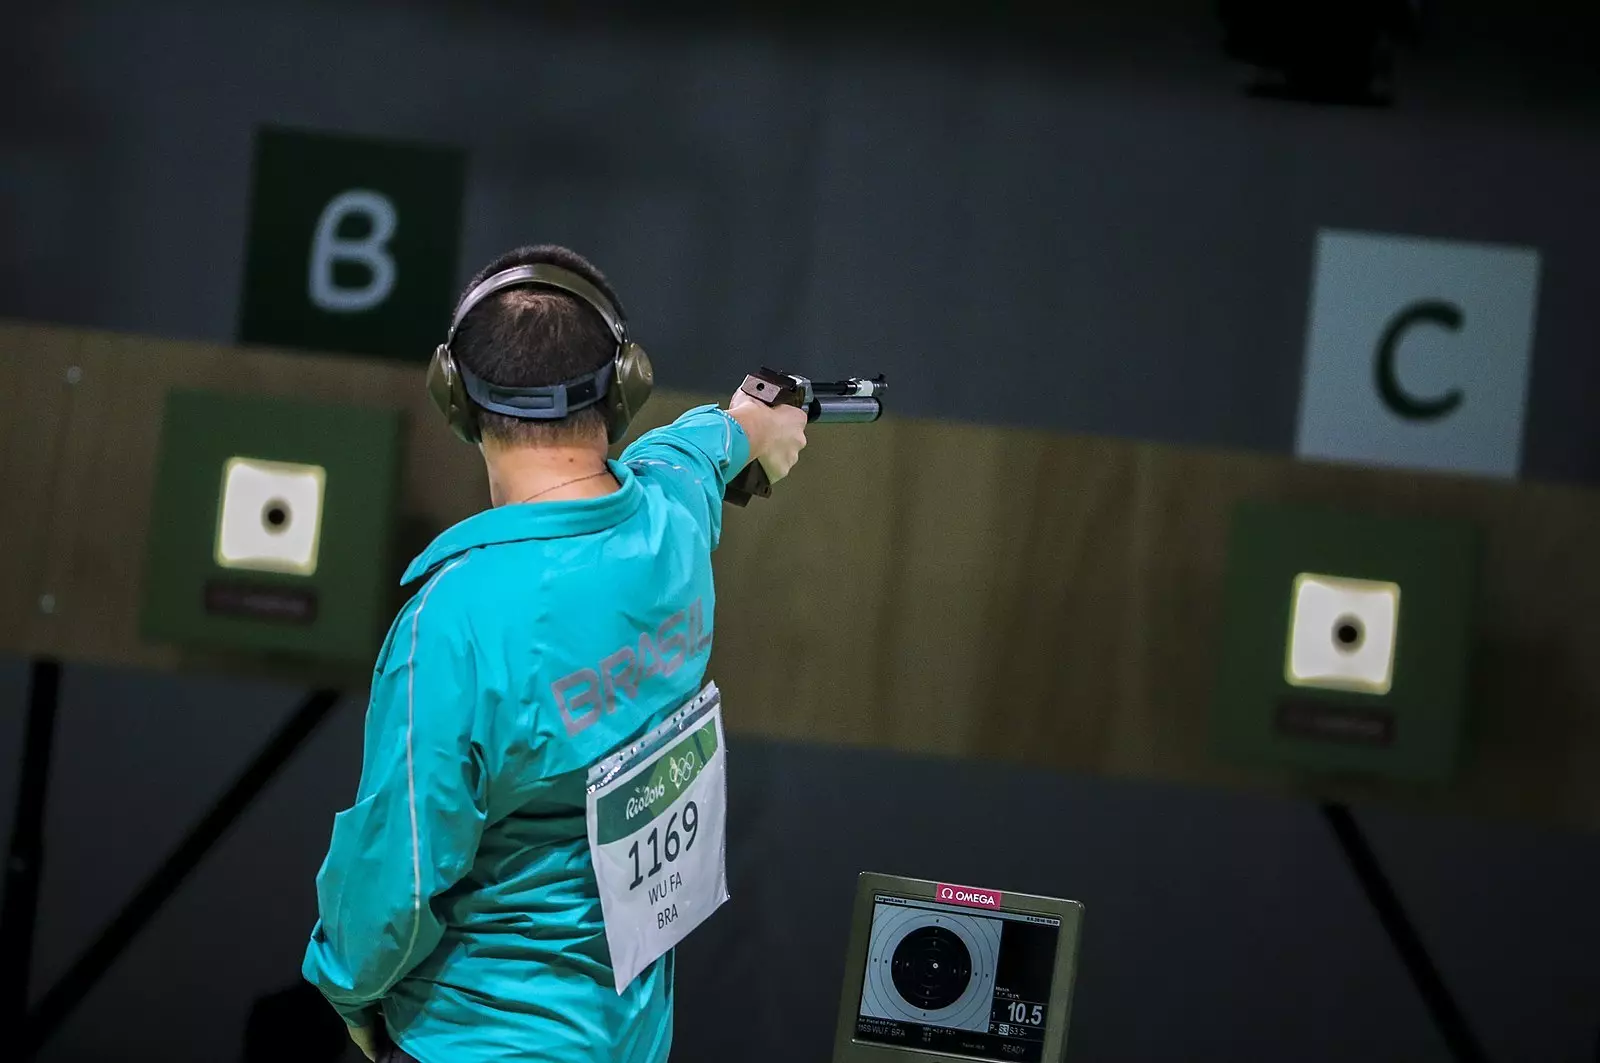 Rassemblements-Crédits : 1600px-Competition_in_air_pistol_shooting_from_a_distance_-_10_meters_at_the_Olympic_Games_in_2016_06